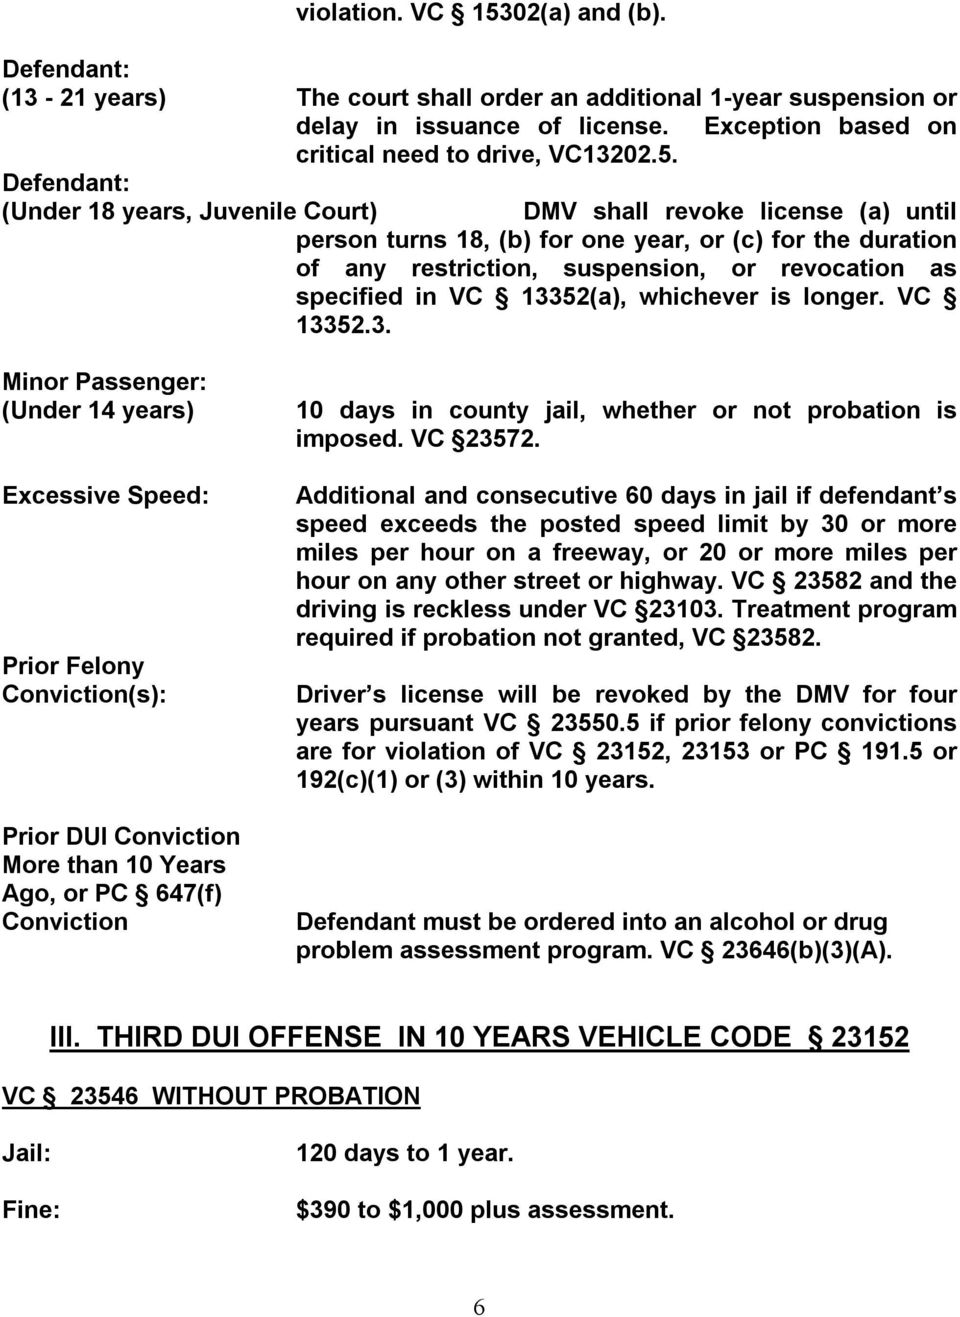 (Under 18 years, Juvenile Court) DMV shall revoke license (a) until person turns 18, (b) for one year, or (c) for the duration of any restriction, suspension, or revocation as specified in VC